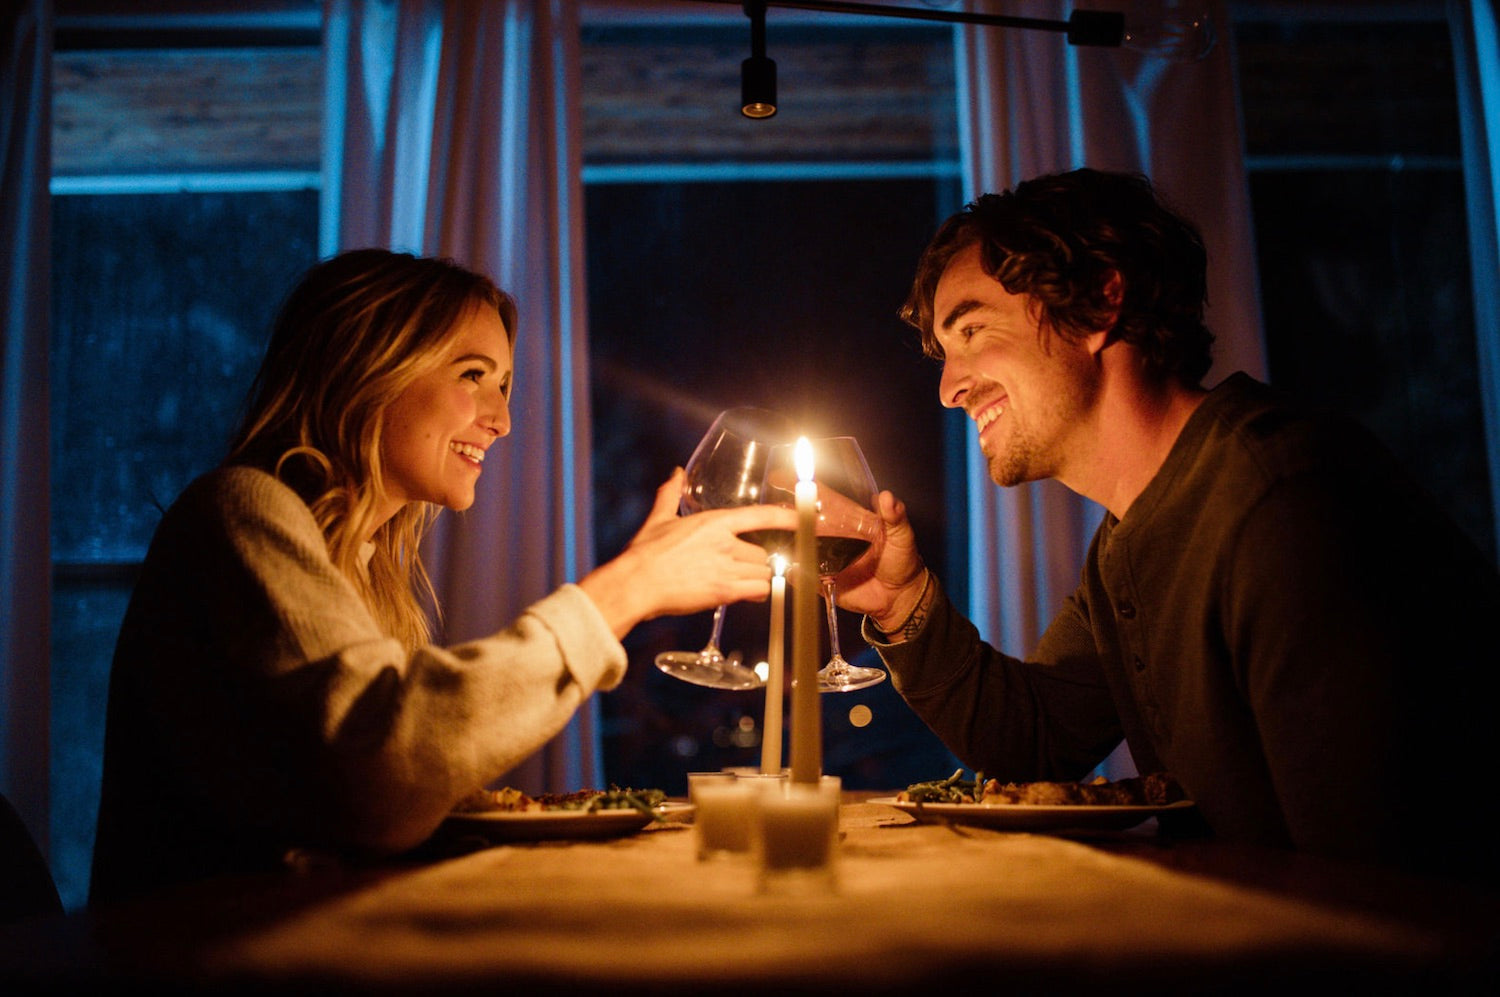 Couple smiling at each other as they share a toast during their romantic candlelit dinner together